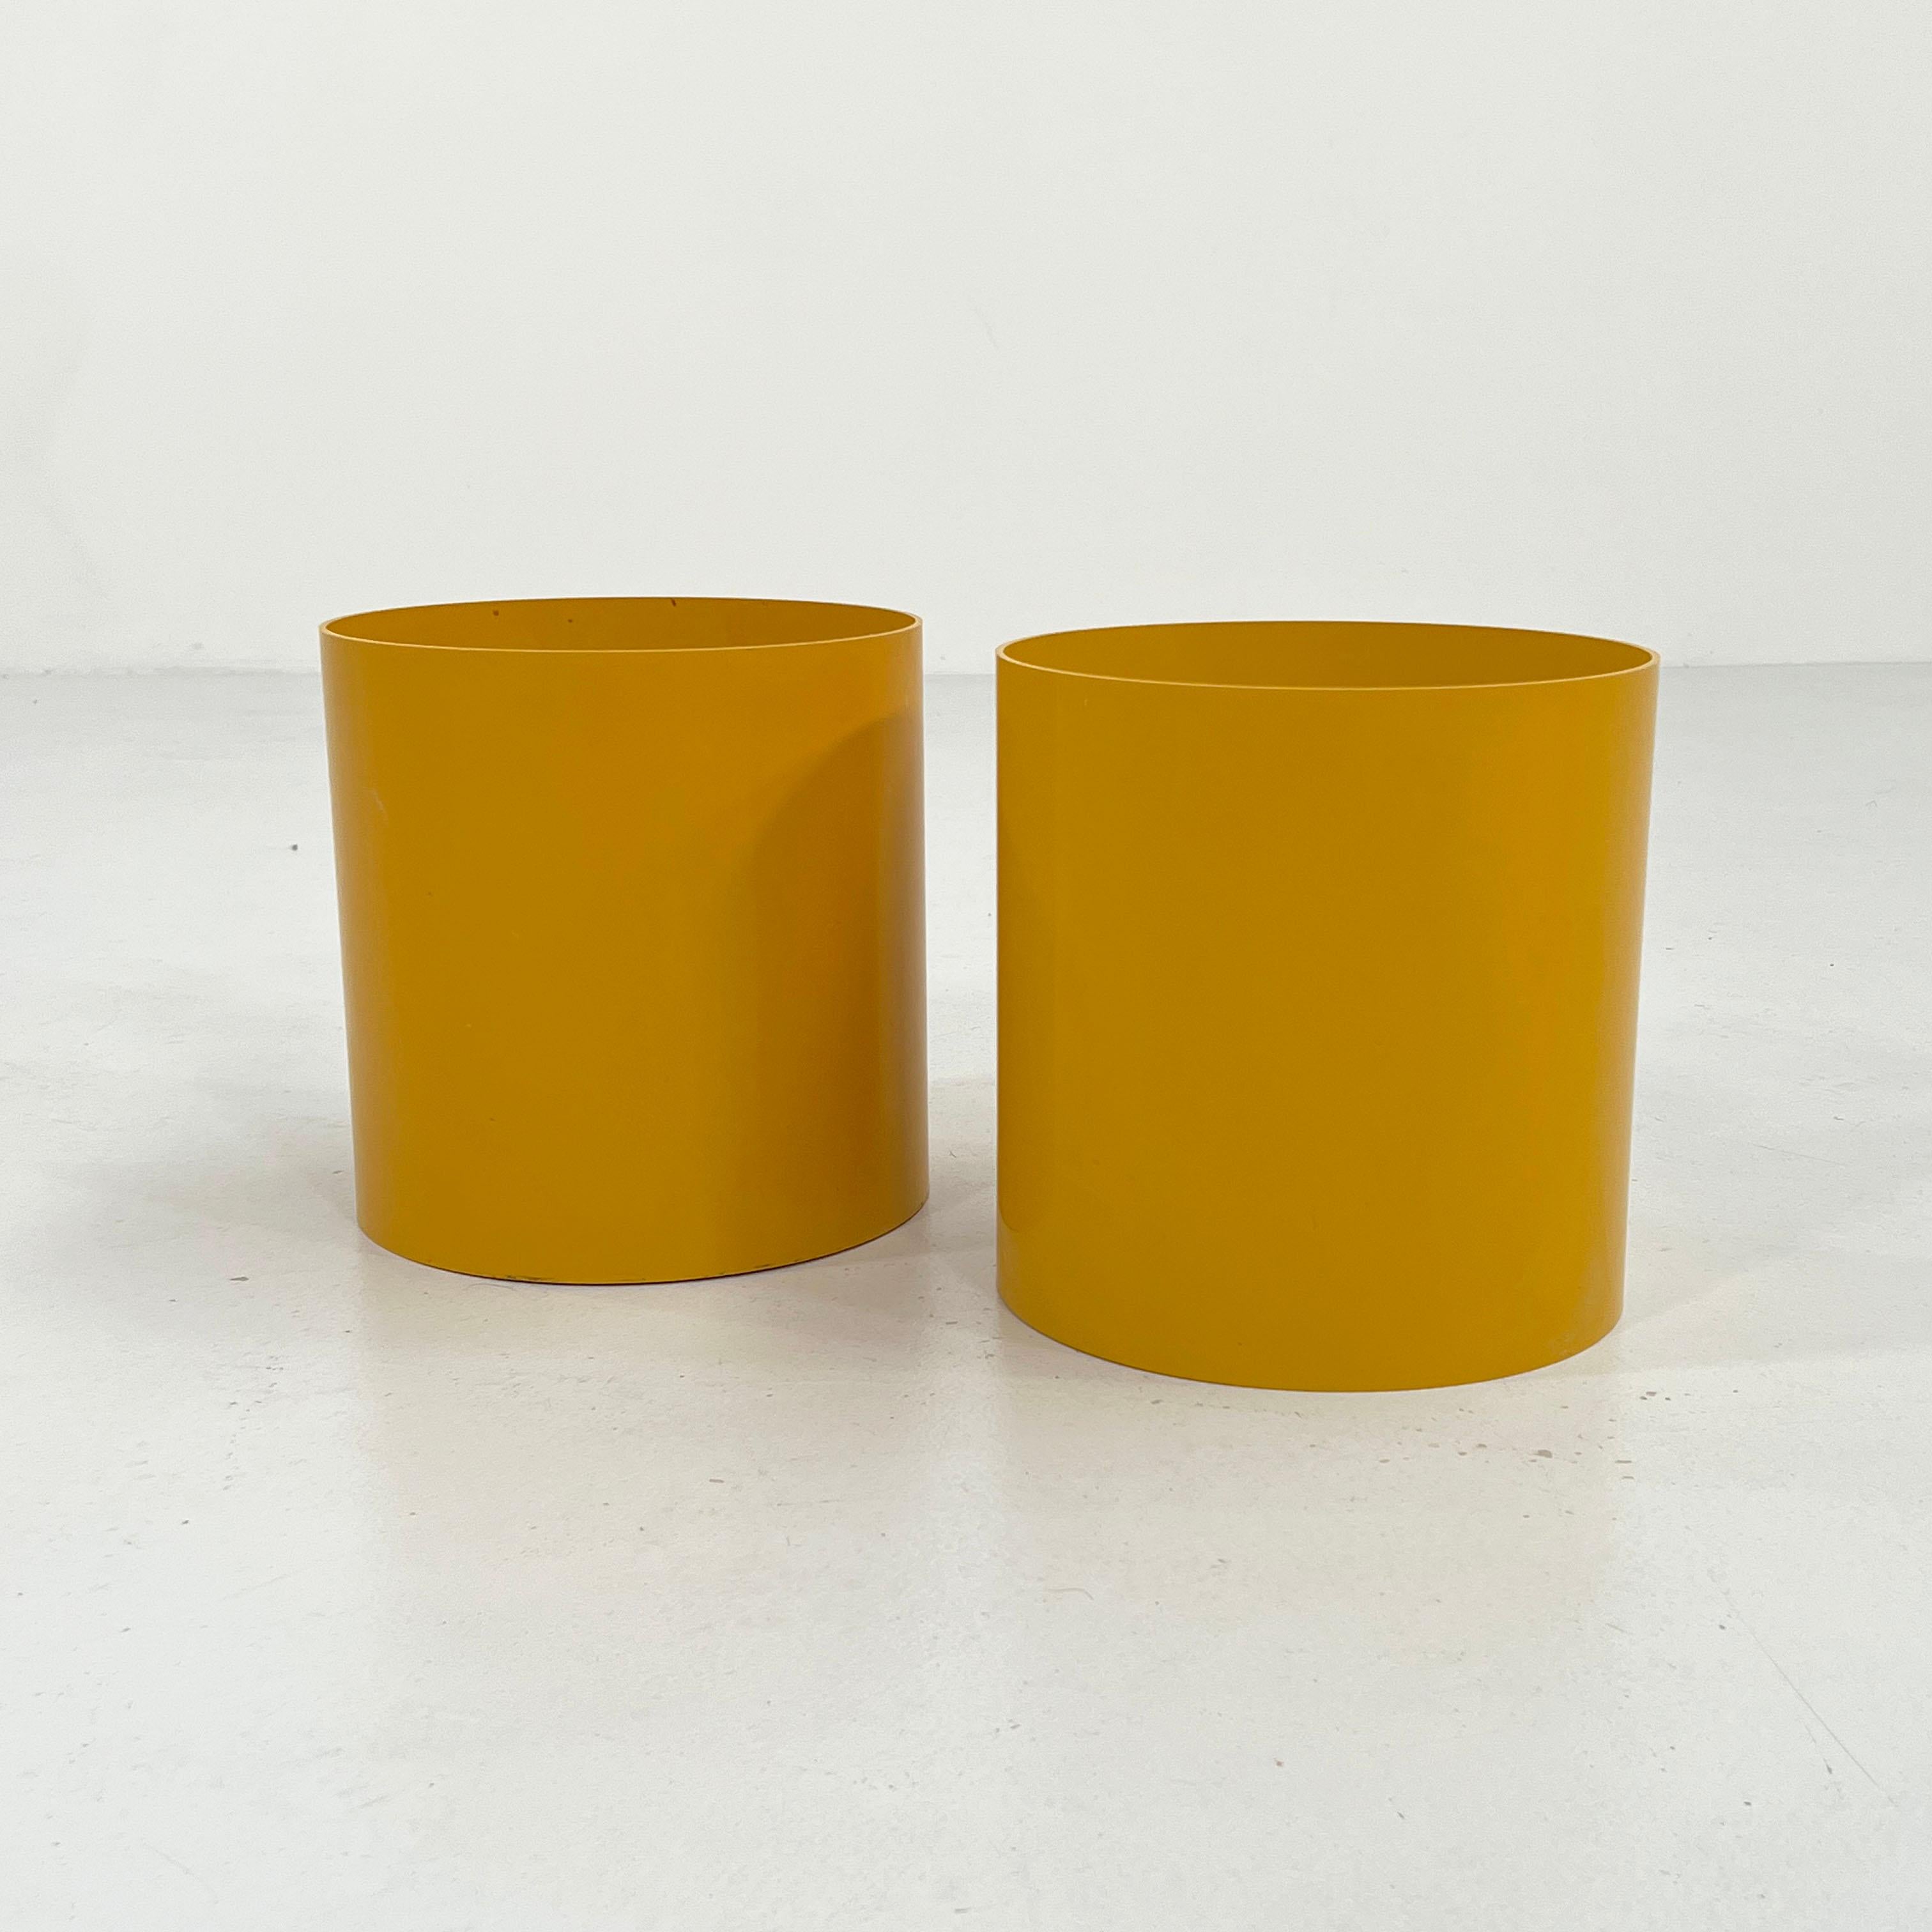 Plastic Yellow Waste Paper Bin Model 4660 by Gino Colombini for Kartell, 1970s